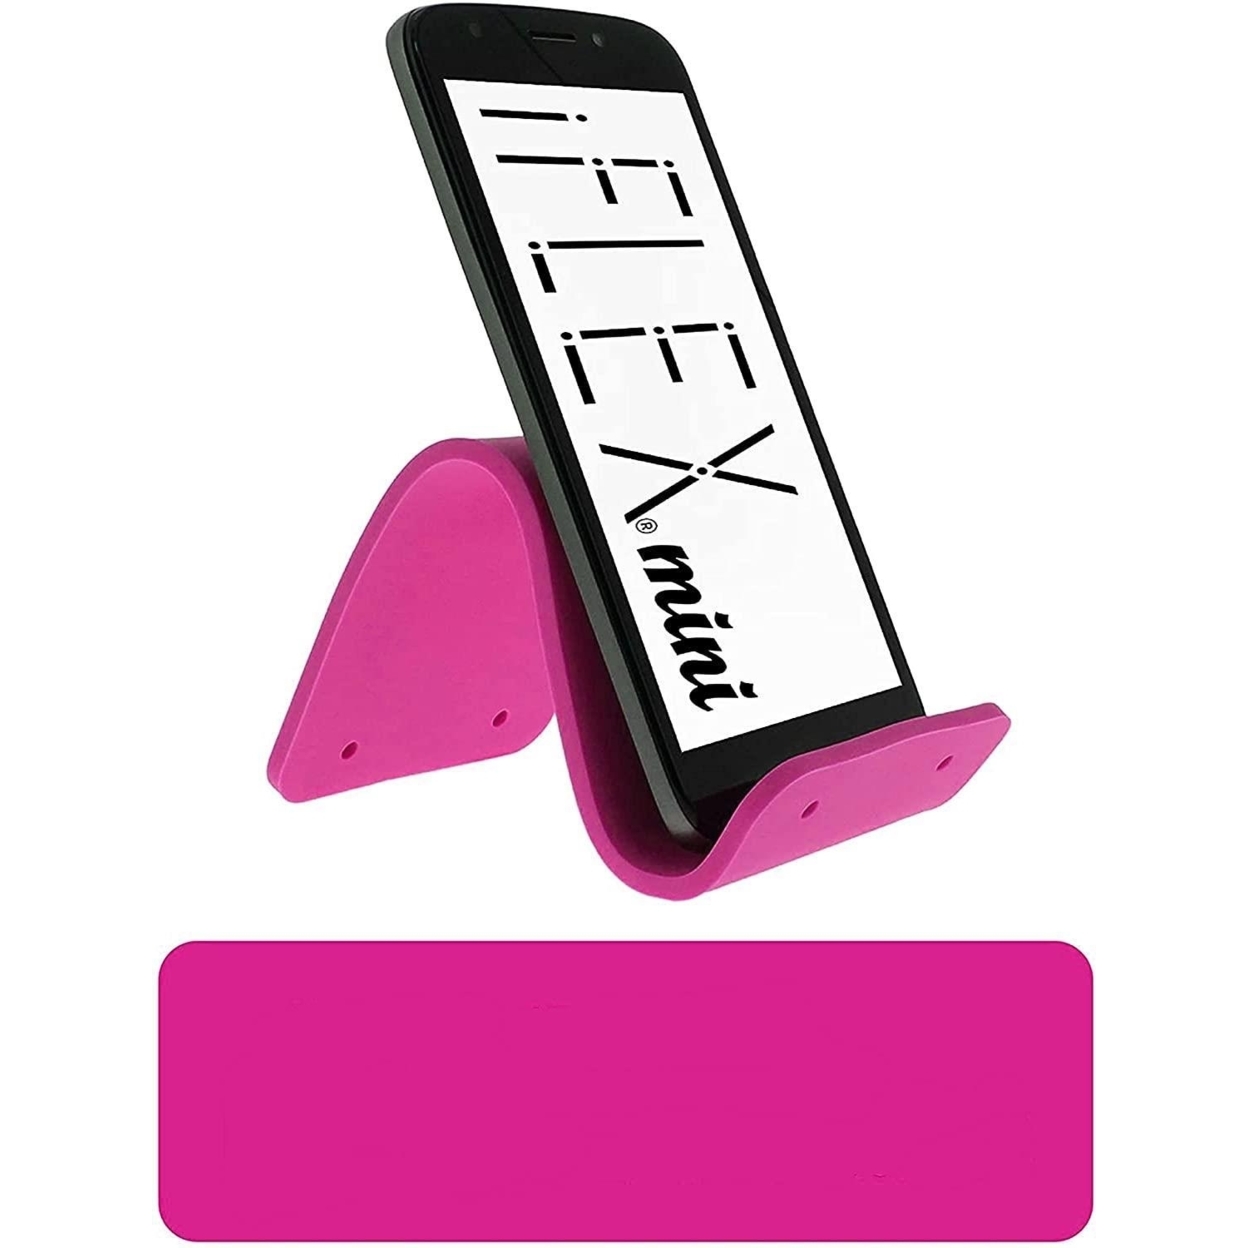 IFLEX Mini Flexible Silicone Cell Phone Holder Pink Universal Non-Slip Hands-Free